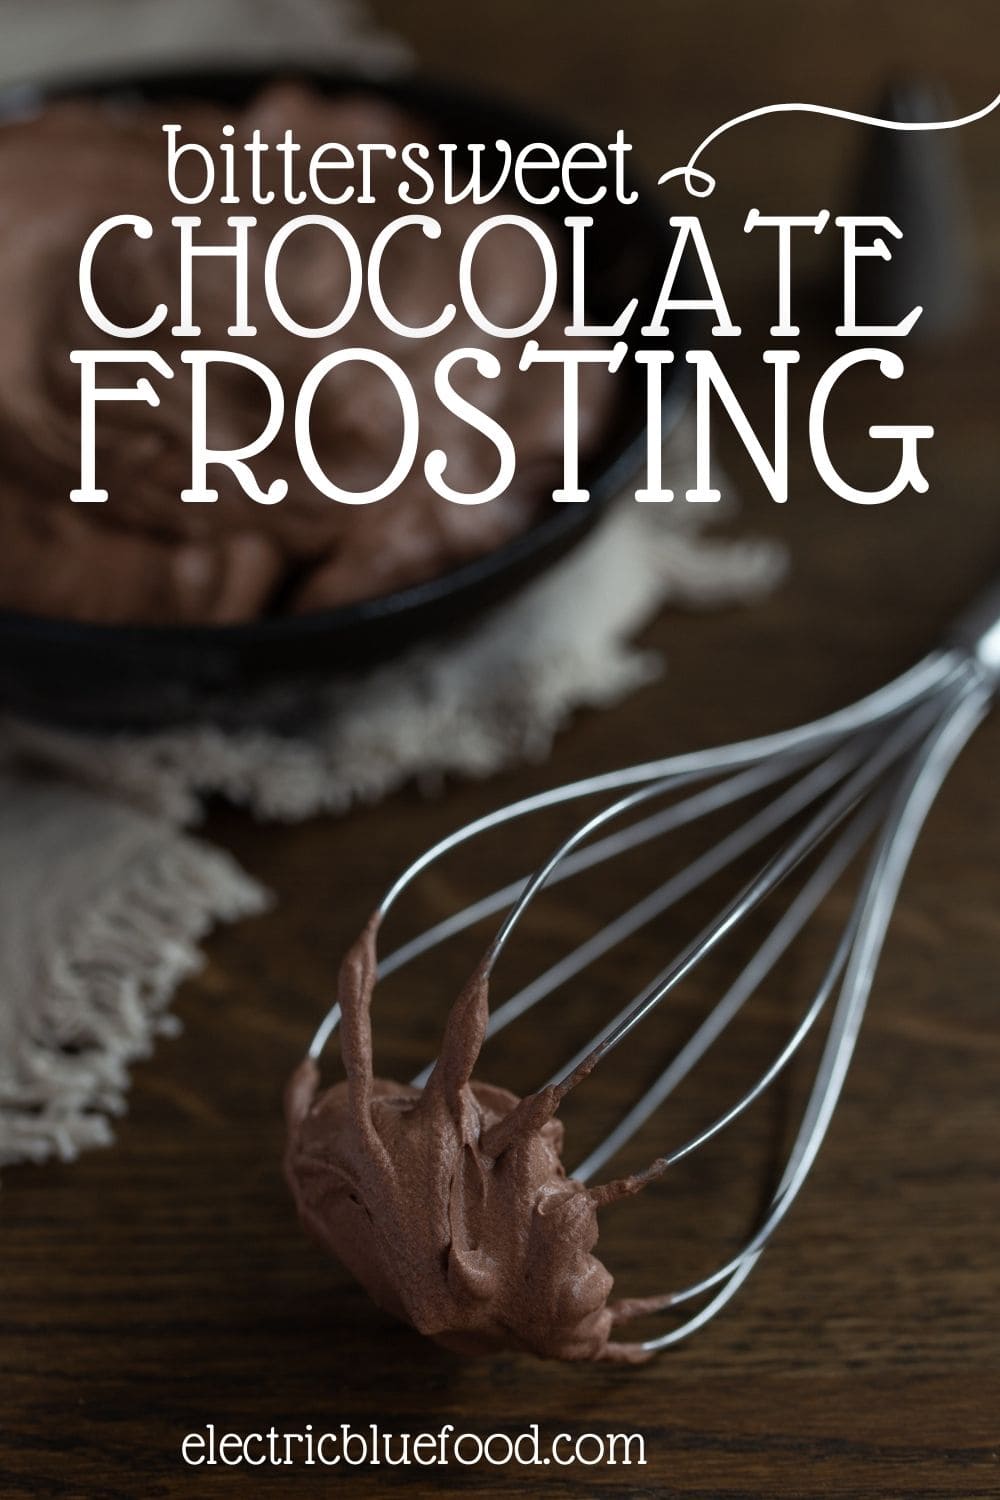 This bittersweet chocolate frosting made with whipped cream is a thick and airy frosting that is not too sweet, perfectly delivering the flavour of cocoa. Great to pair with very sweet cakes to tame their sweetness, or with chocolate desserts, to up the chocolate flavour!